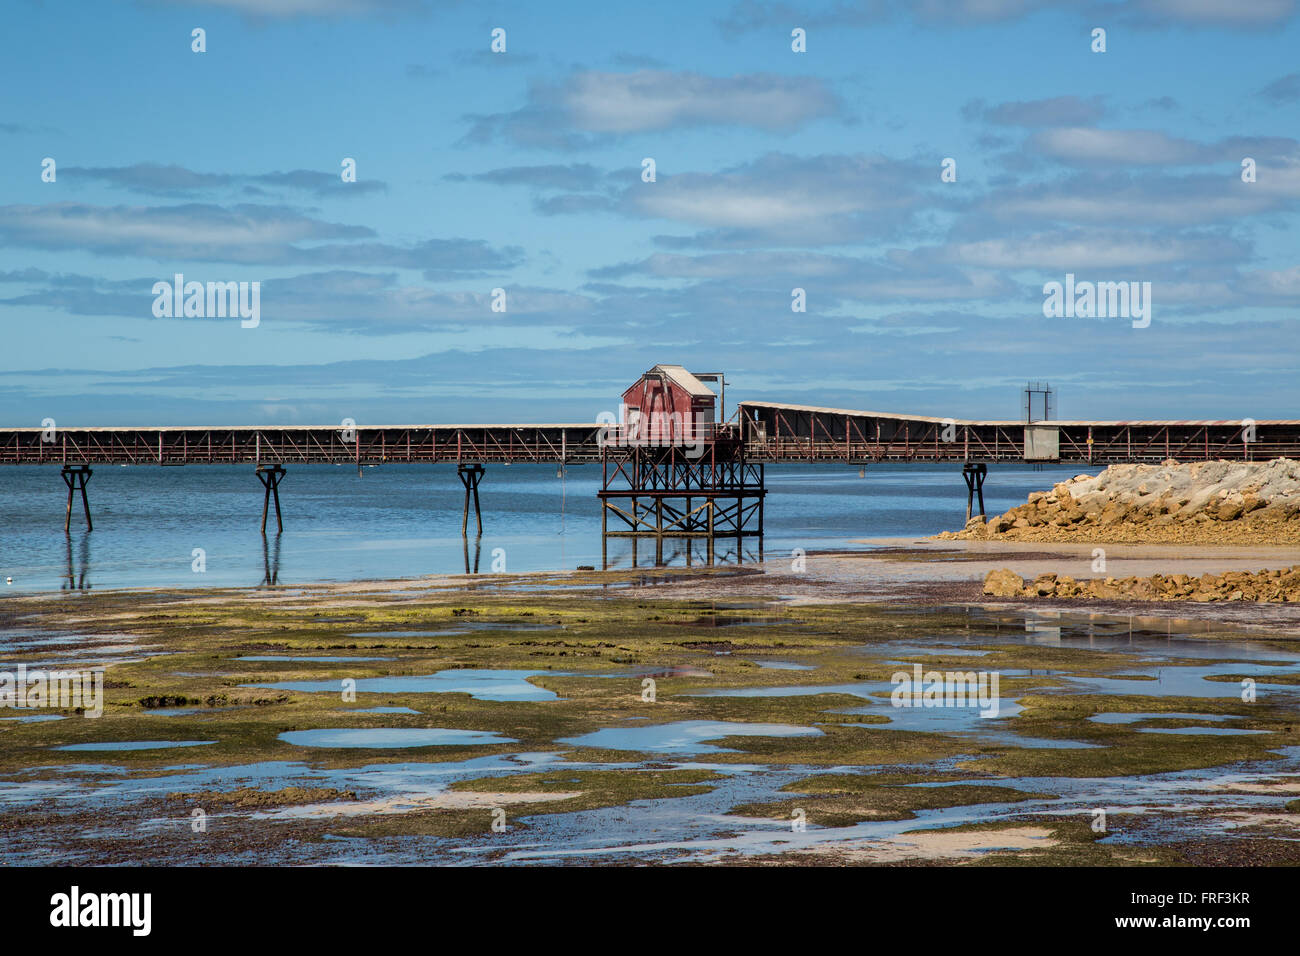 industrial loading jetty with red house, shallow water speckled with seaweed and sandbanks under blue sky with cumulus clouds Stock Photo